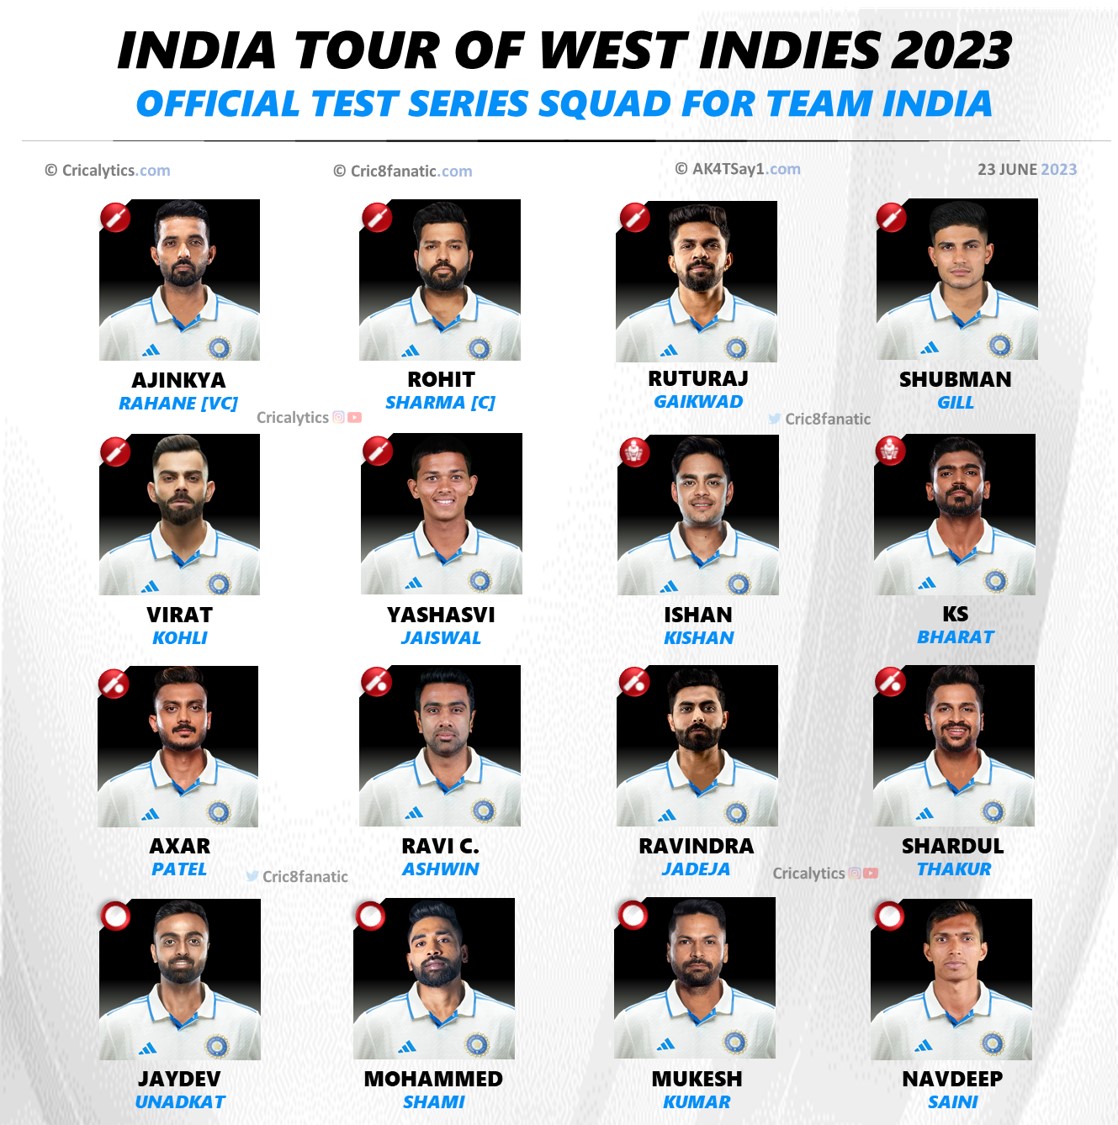 India vs West Indies 2023 Test Squad Players List for Team India